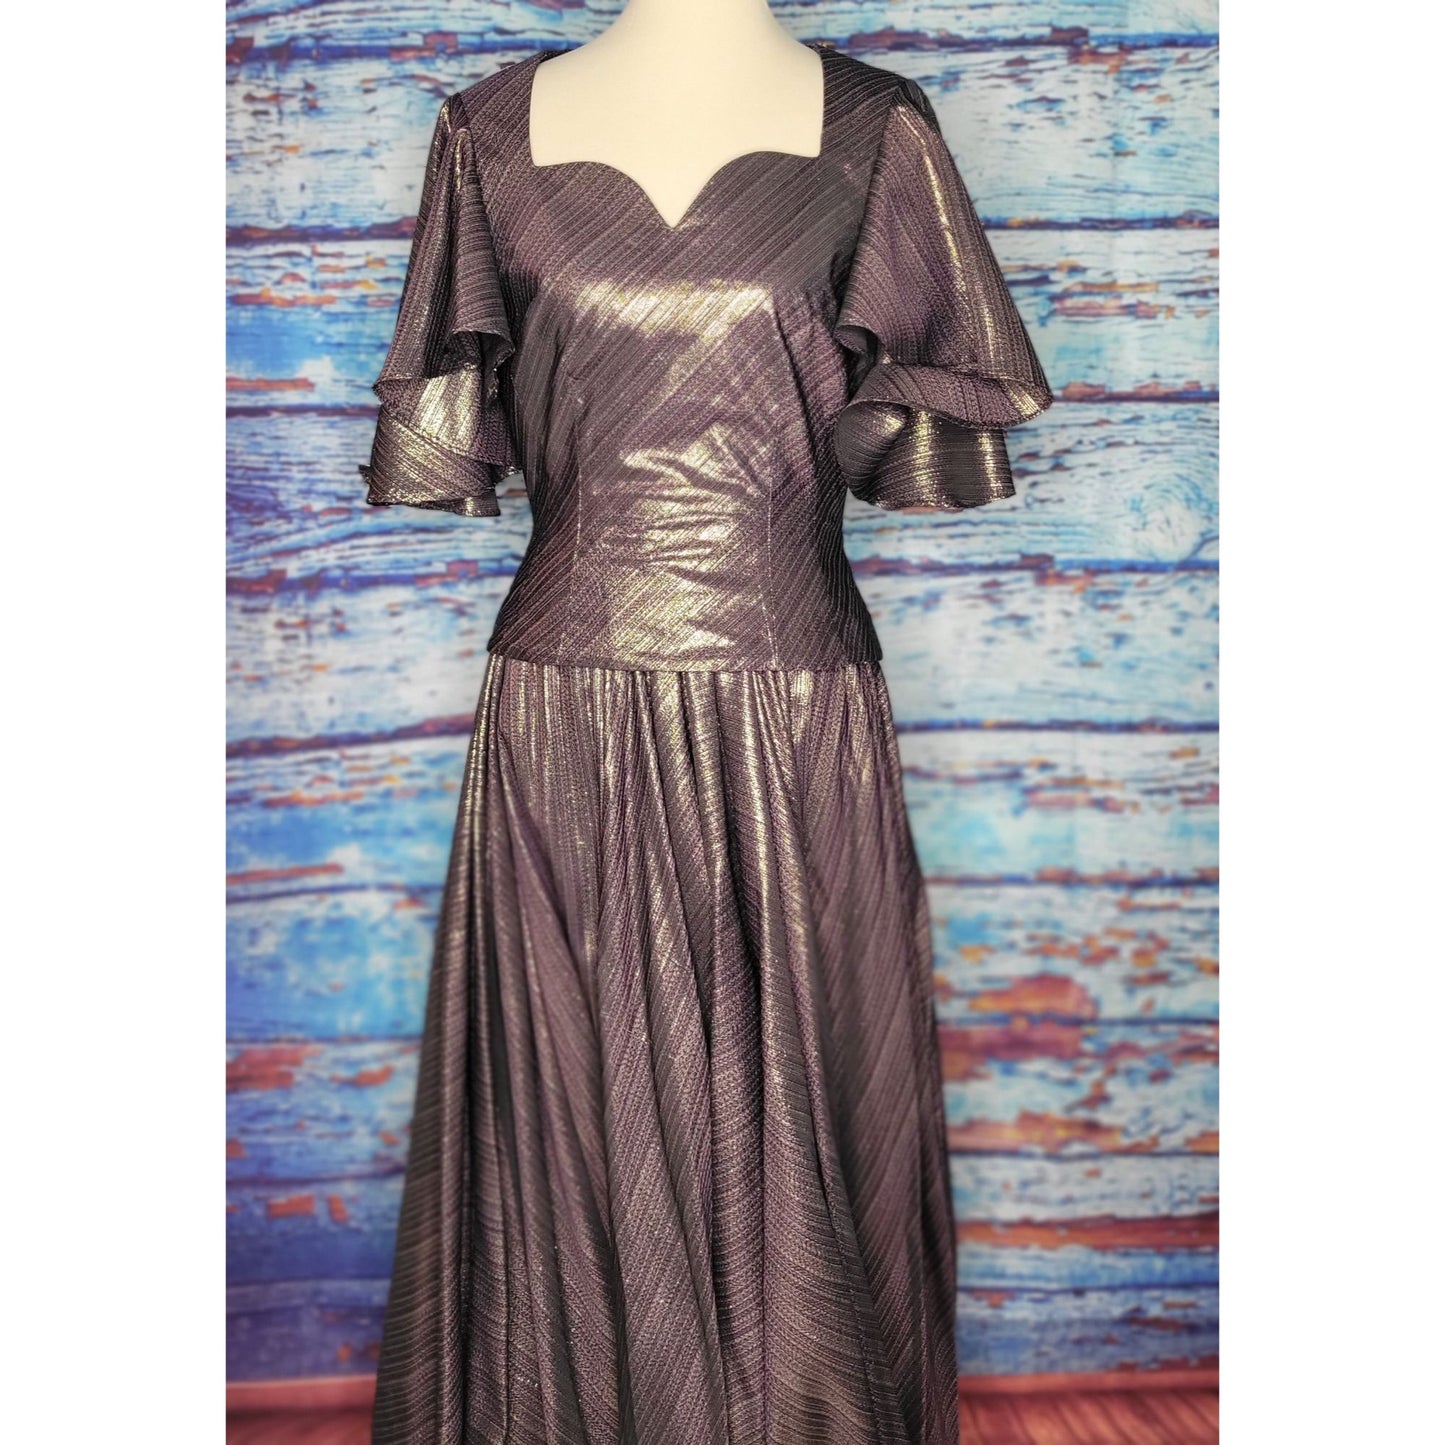 Beautiful Purple & Metallic Threaded Evening Gown by The Marilyn Johnson